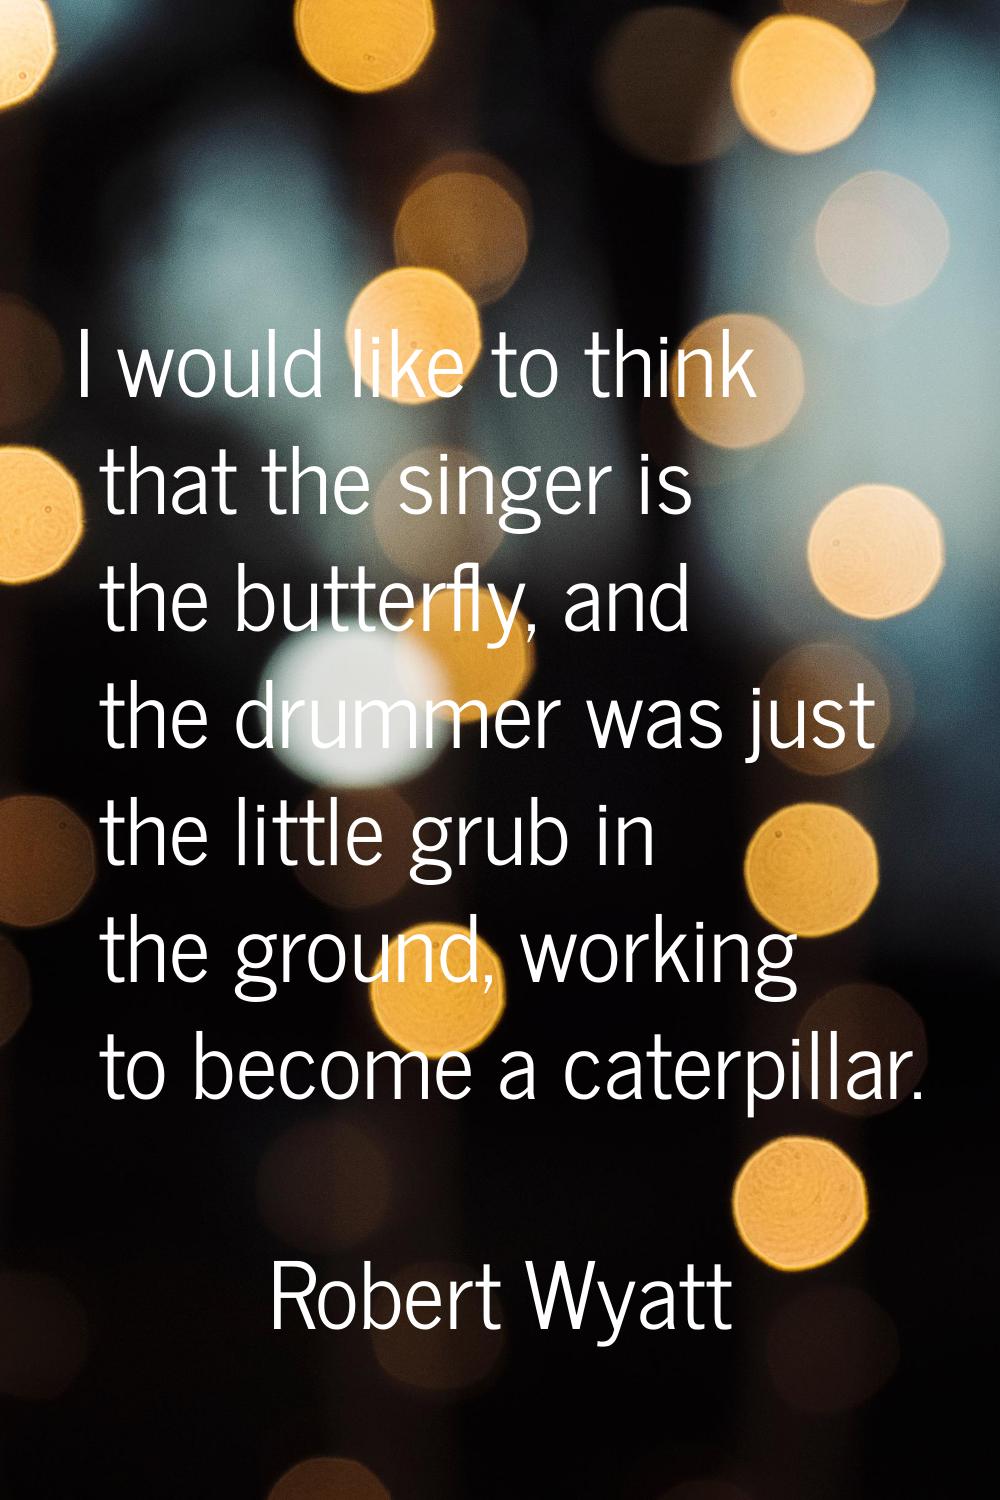 I would like to think that the singer is the butterfly, and the drummer was just the little grub in